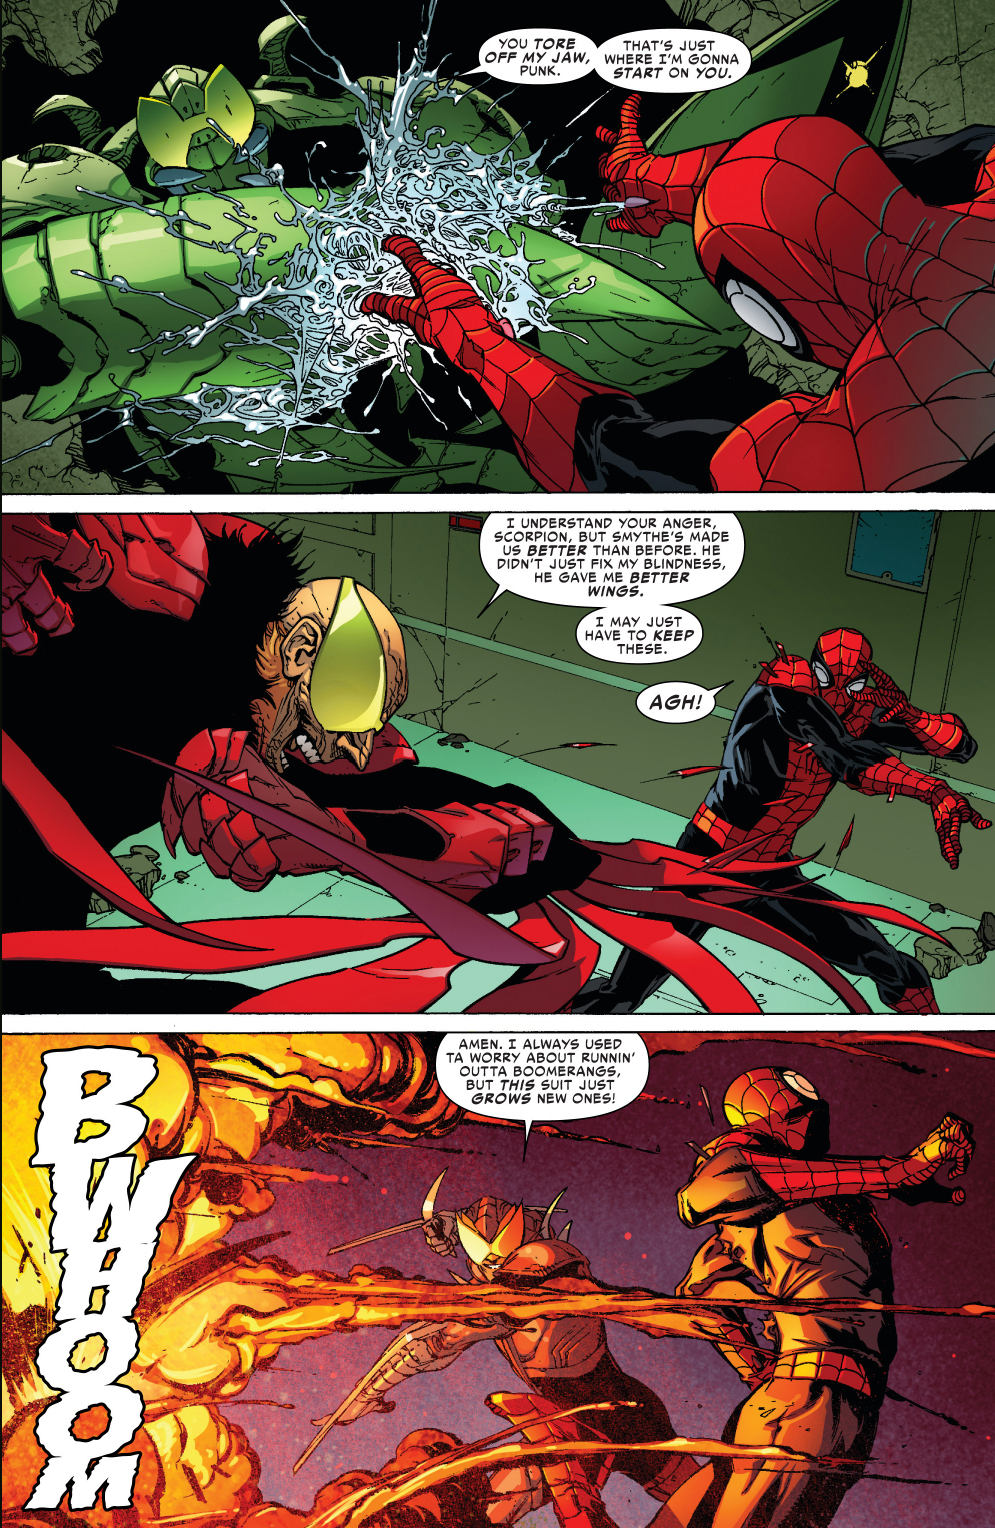 superior spider-man vs the vulture, the scorpion and boomerang